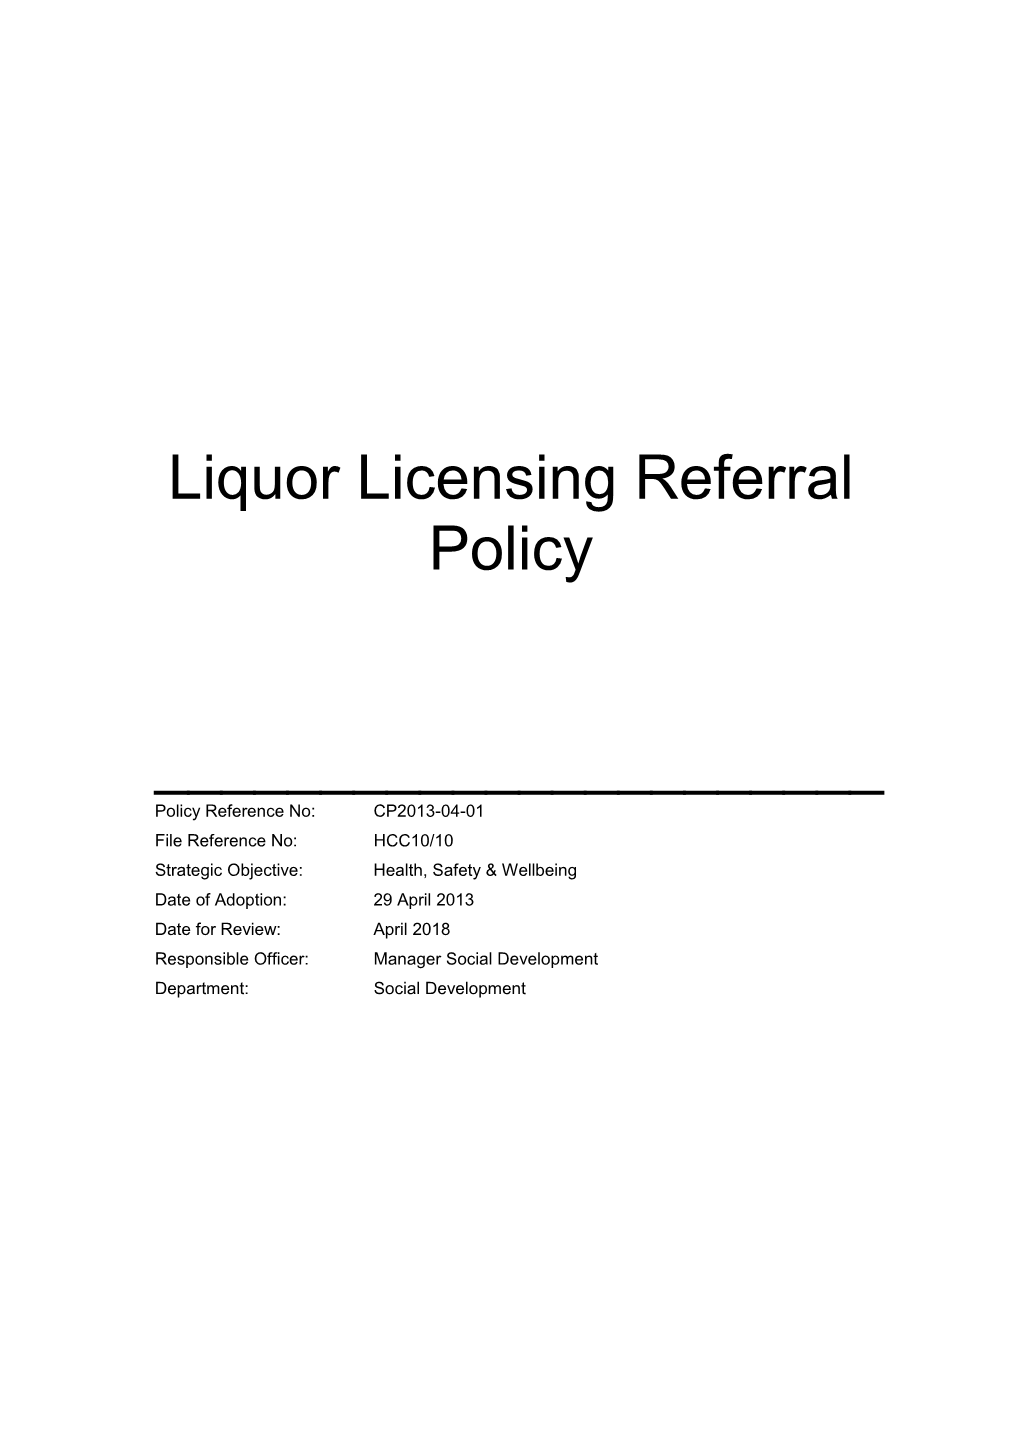 Liquor Licensing Referral Policy